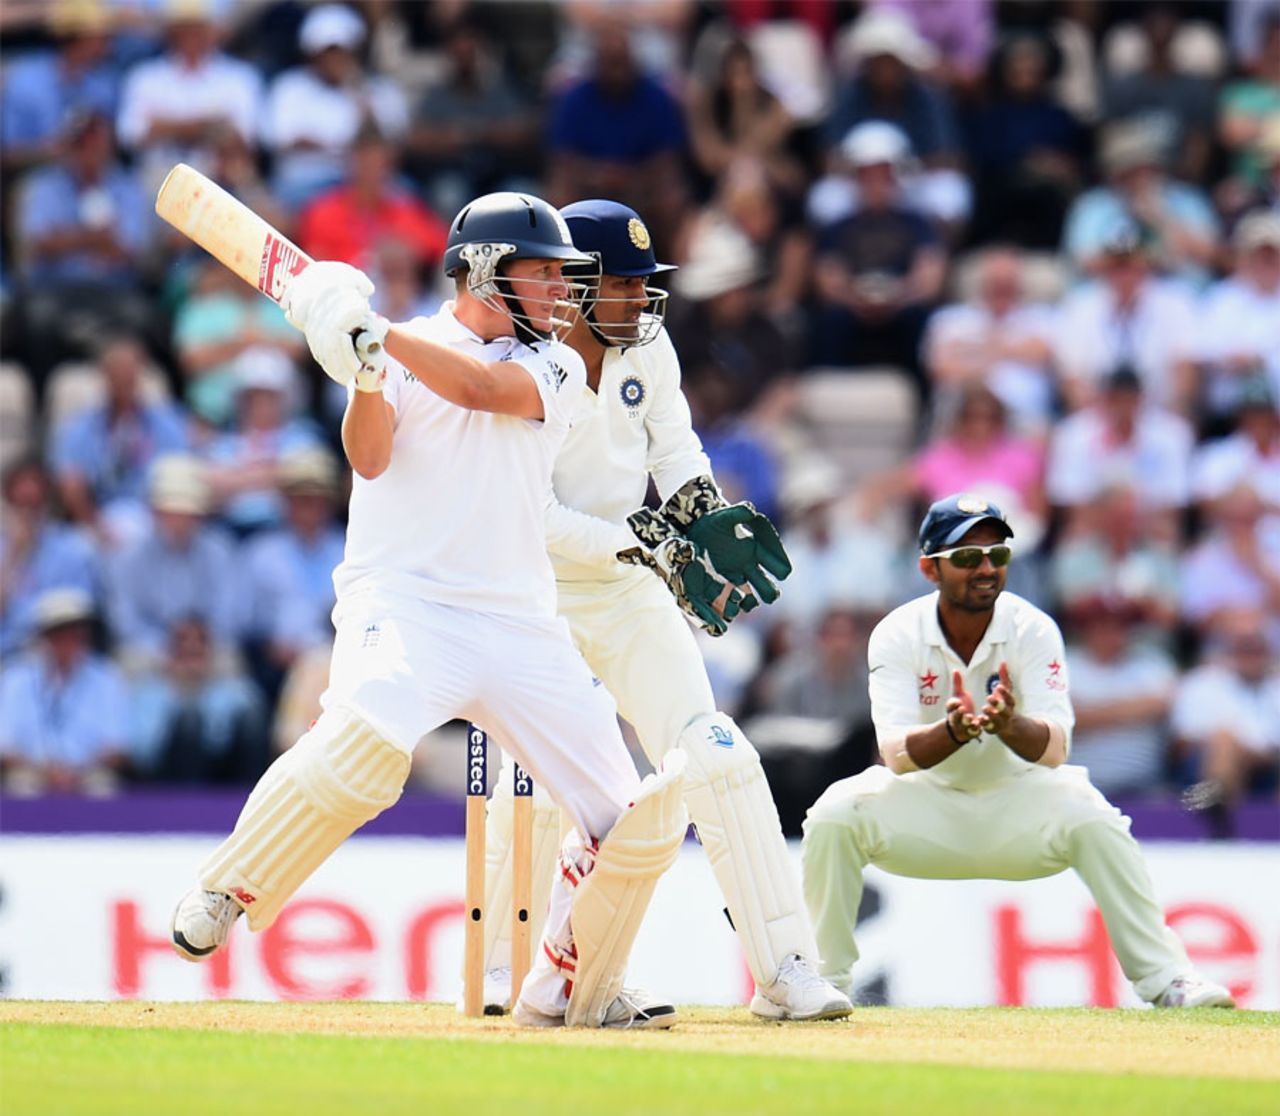 The cut was a highly productive stroke for Gary Ballance, England v India, 3rd Investec Test, Ageas Bowl, 1st day, July 27, 2014